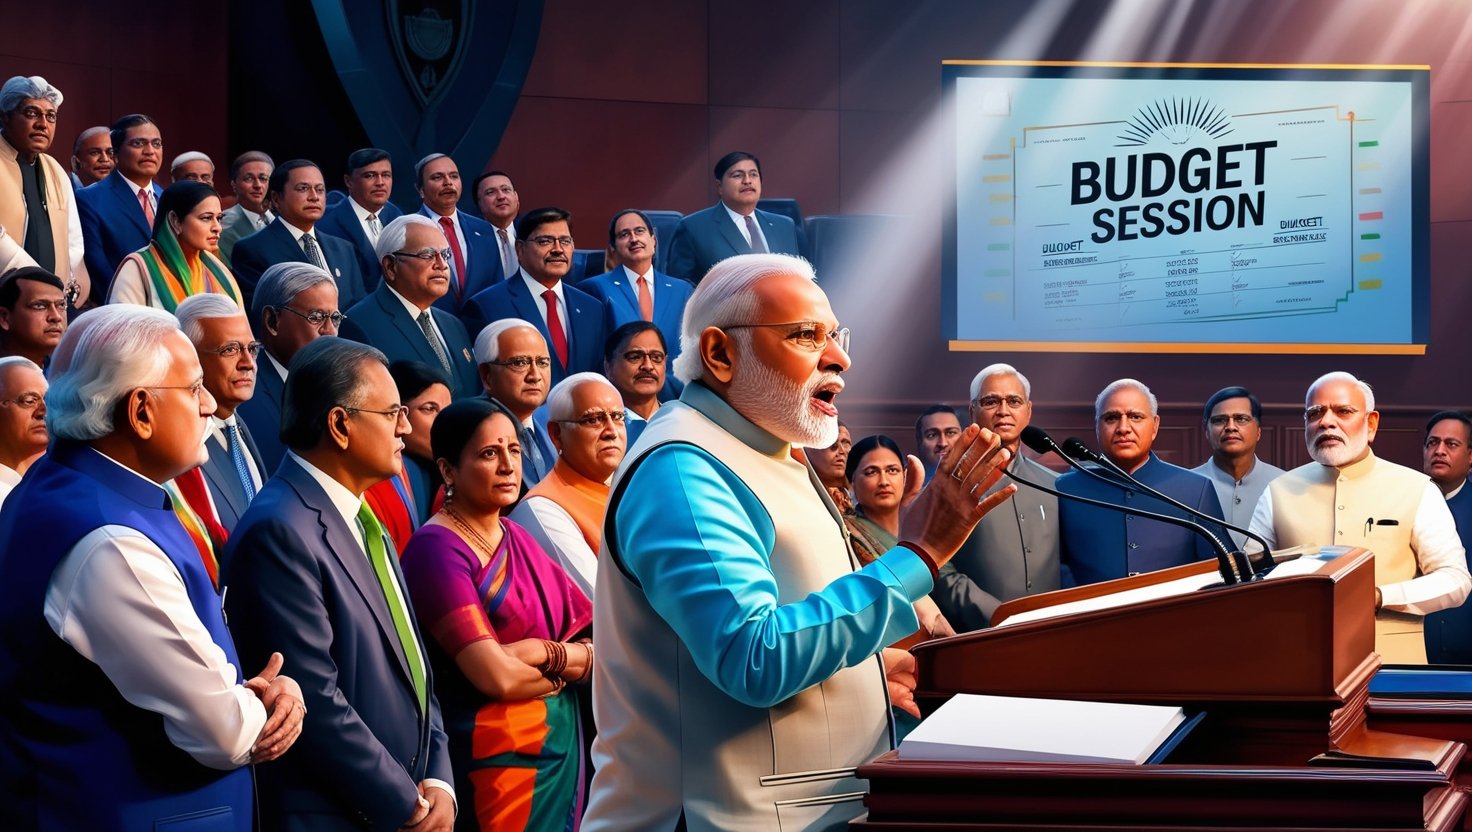 PM Modi Urges Urgent Unity and Constructive Debate Ahead of Crucial Budget Session